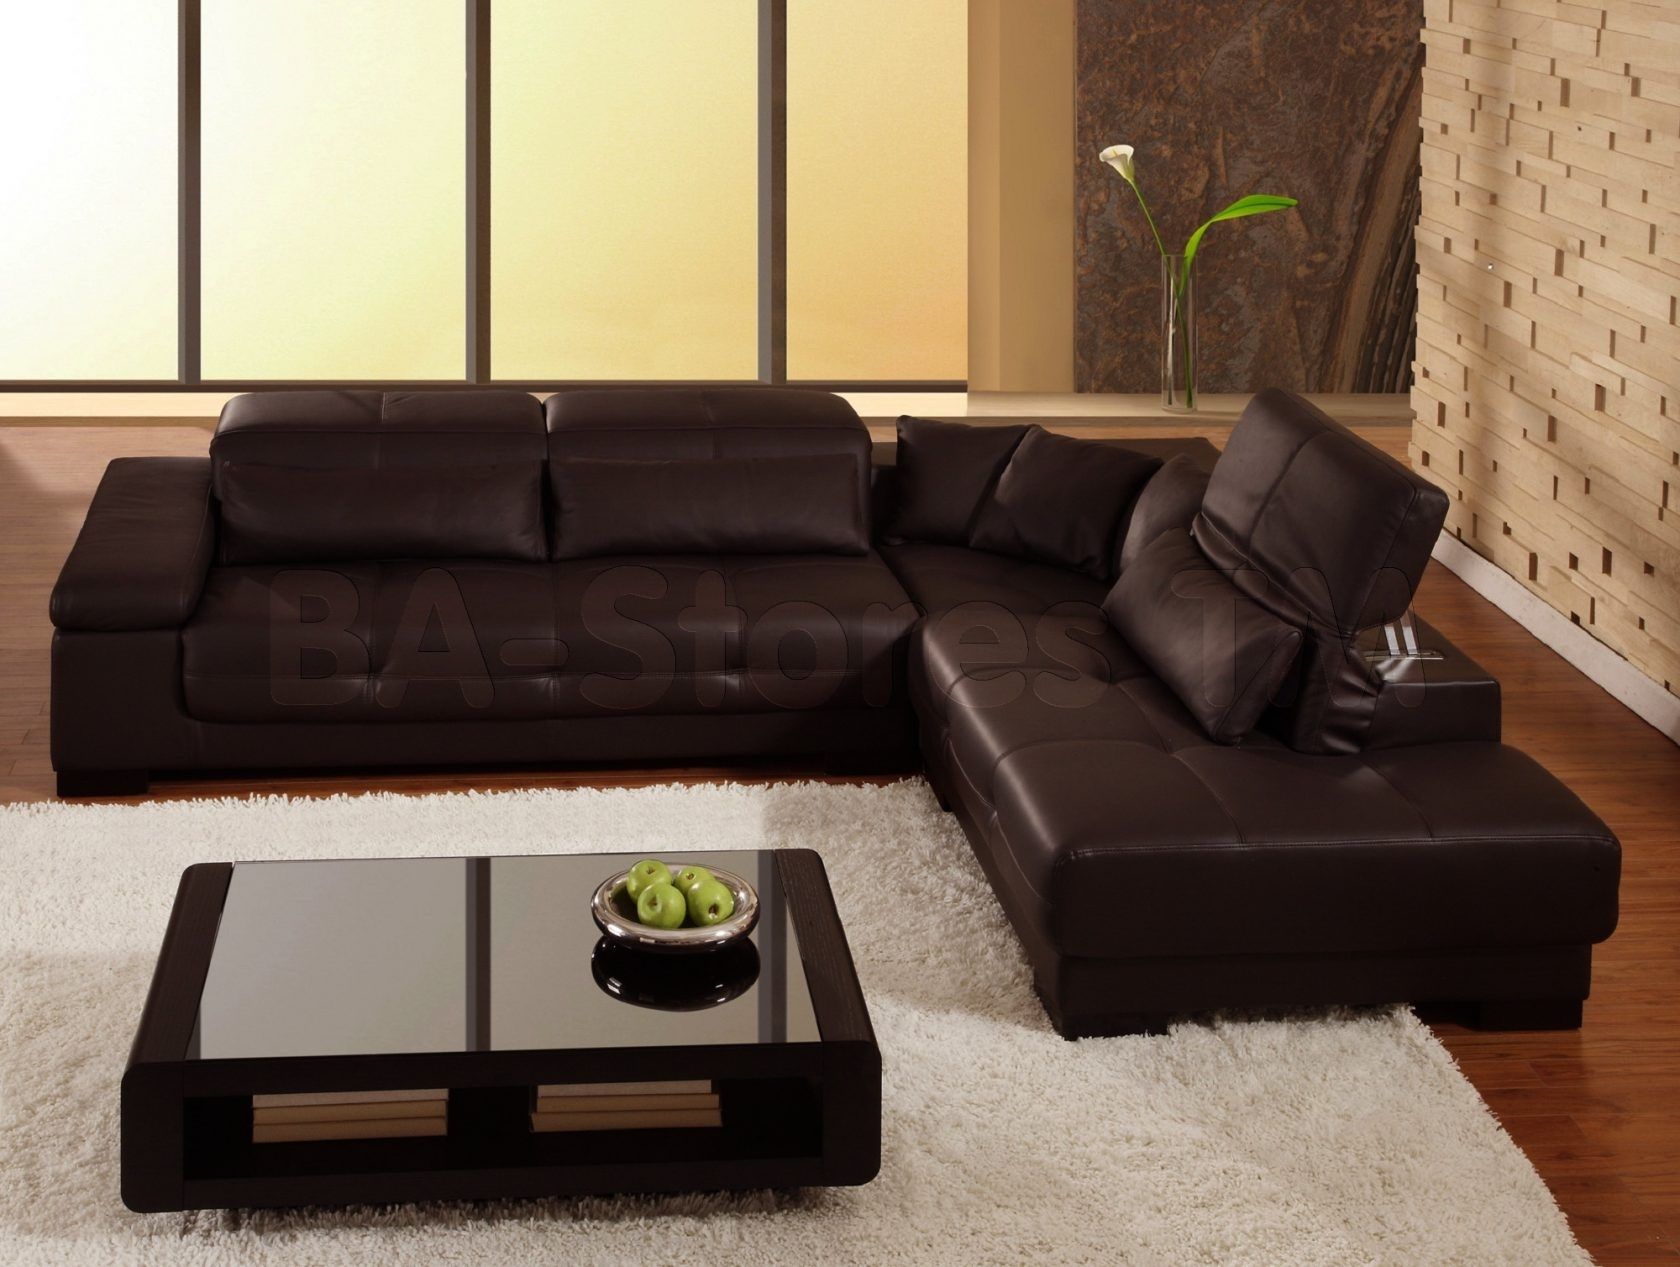 Glamorous Brown Leather Sectional Sofa Clearance 15 For Sectional With Raleigh Nc Sectional Sofas (View 1 of 10)